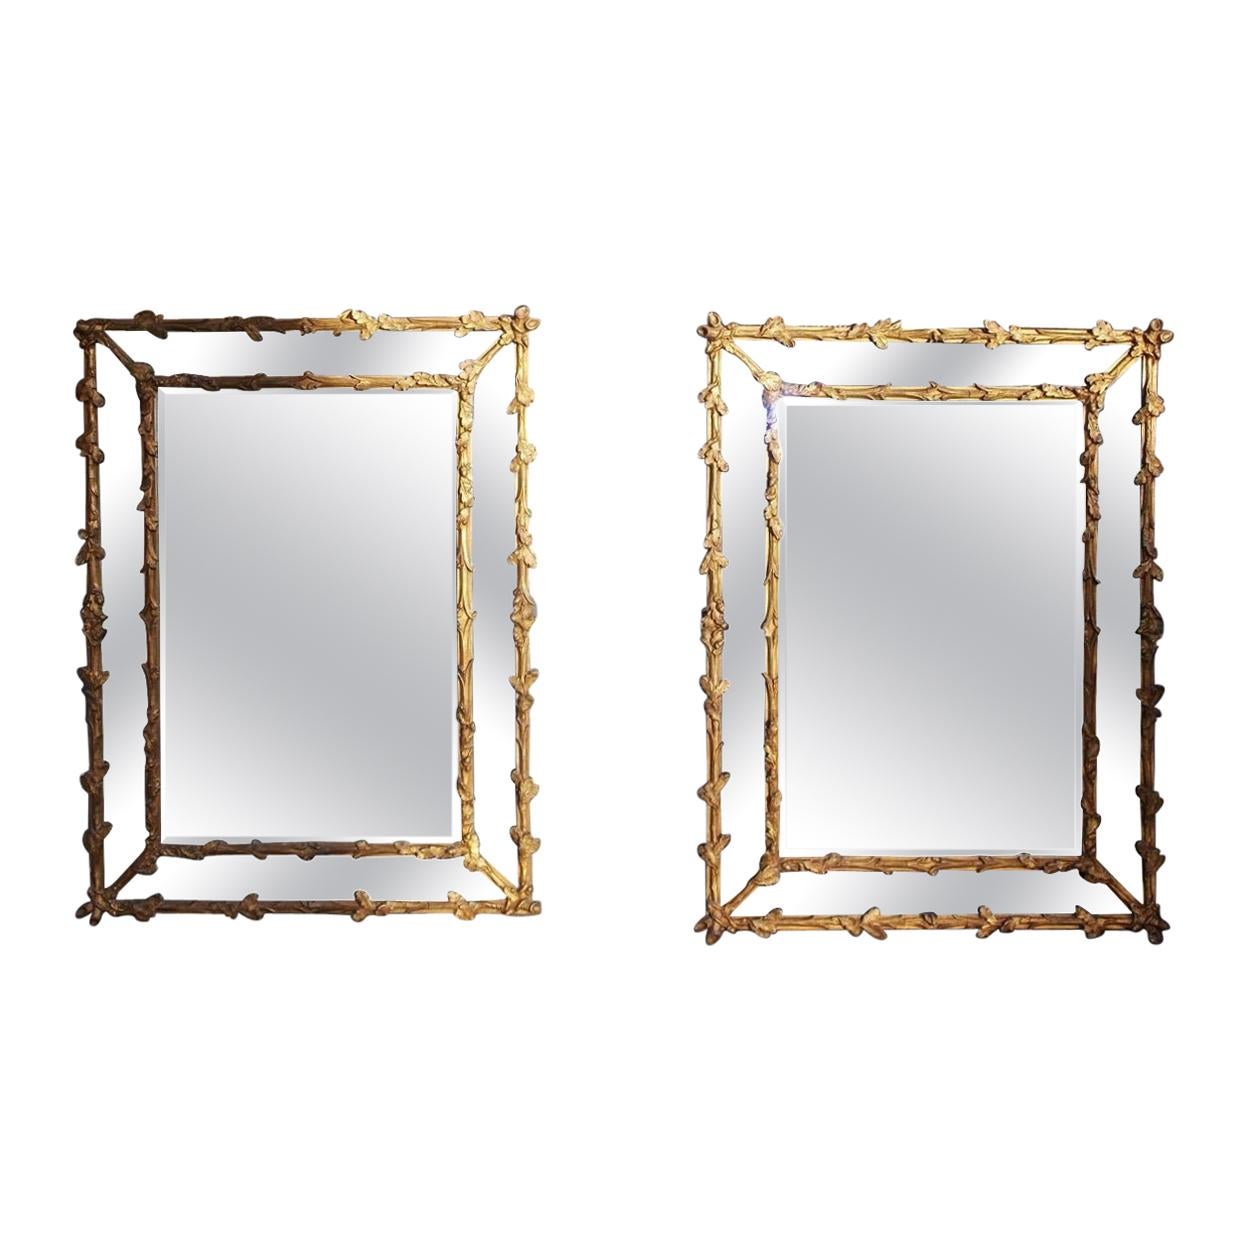 Pair of French Gilt Carved Wood Foliage and Acorn Motif Wall Mirrors, C. 1840